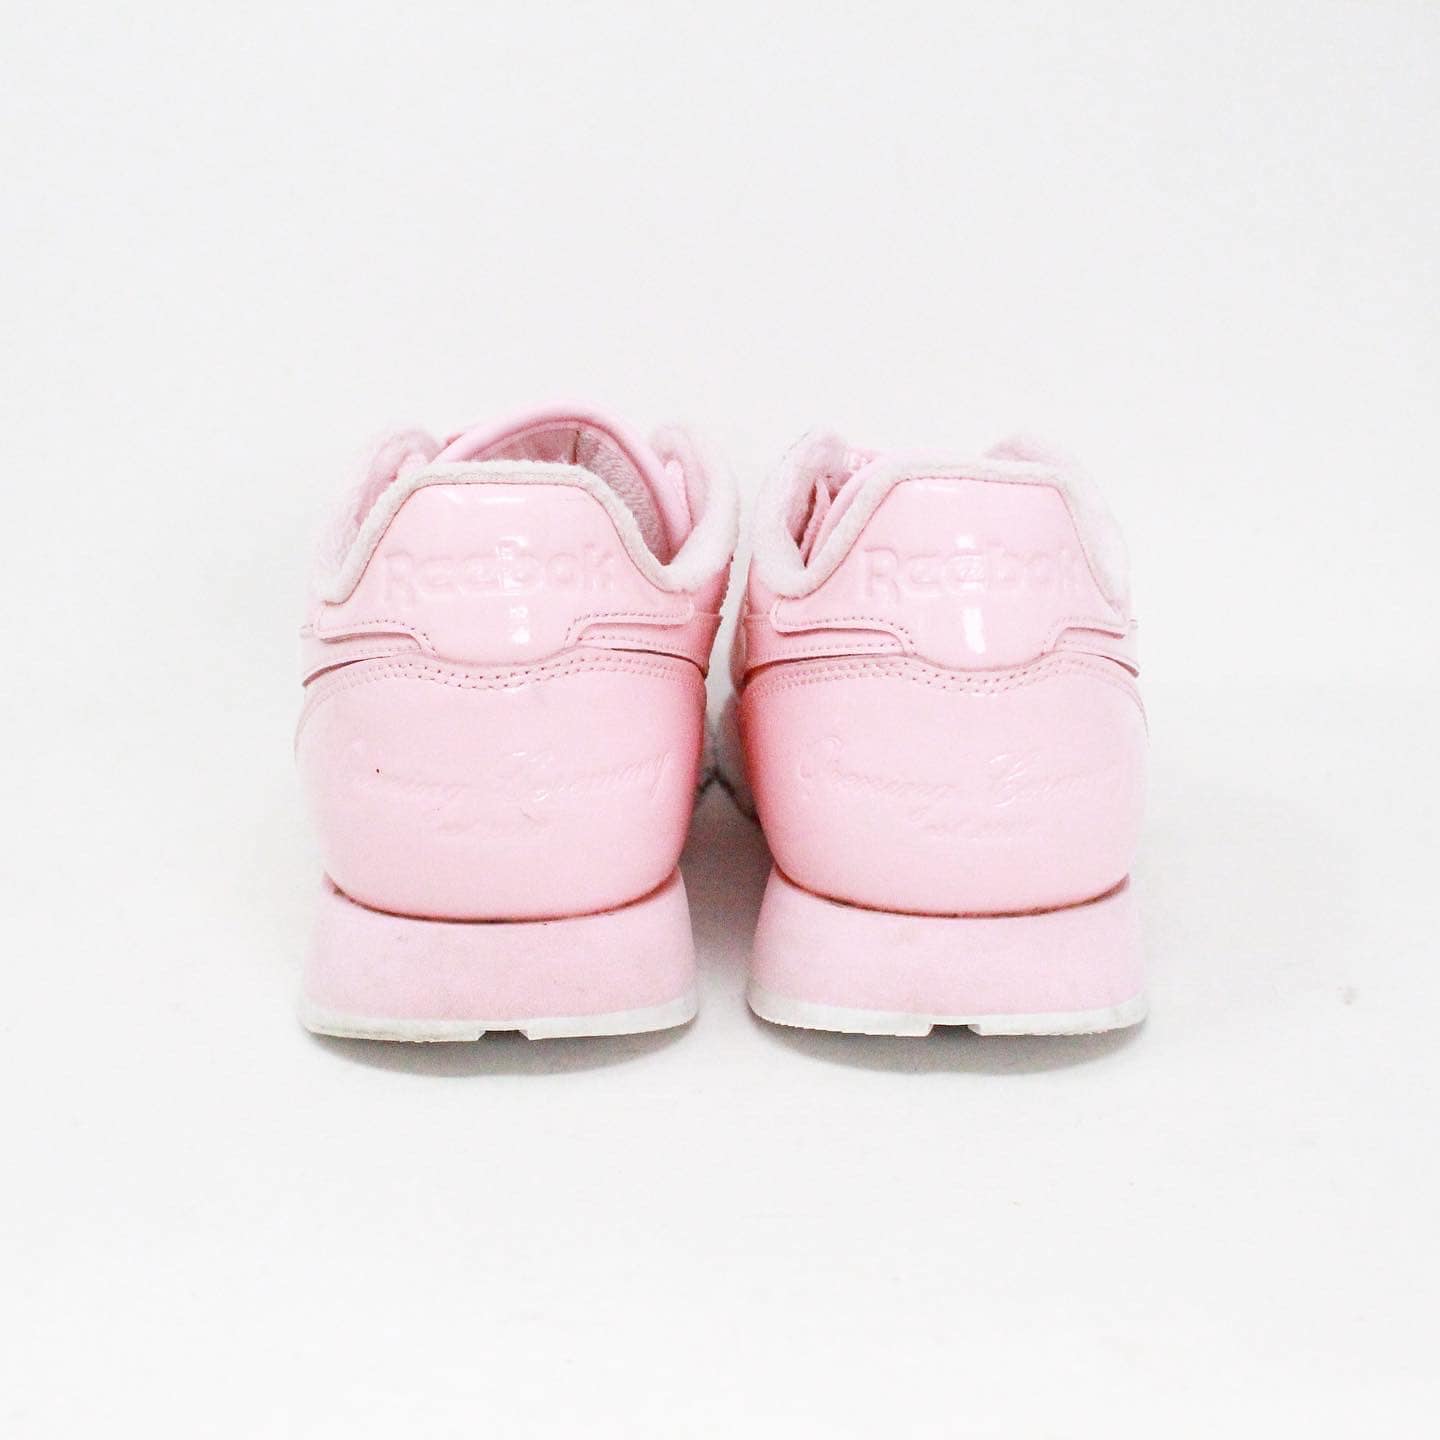 REEBOK 40064 Pink Opening Ceremony X Classic Leather Sneakers US 8 EU 38 c